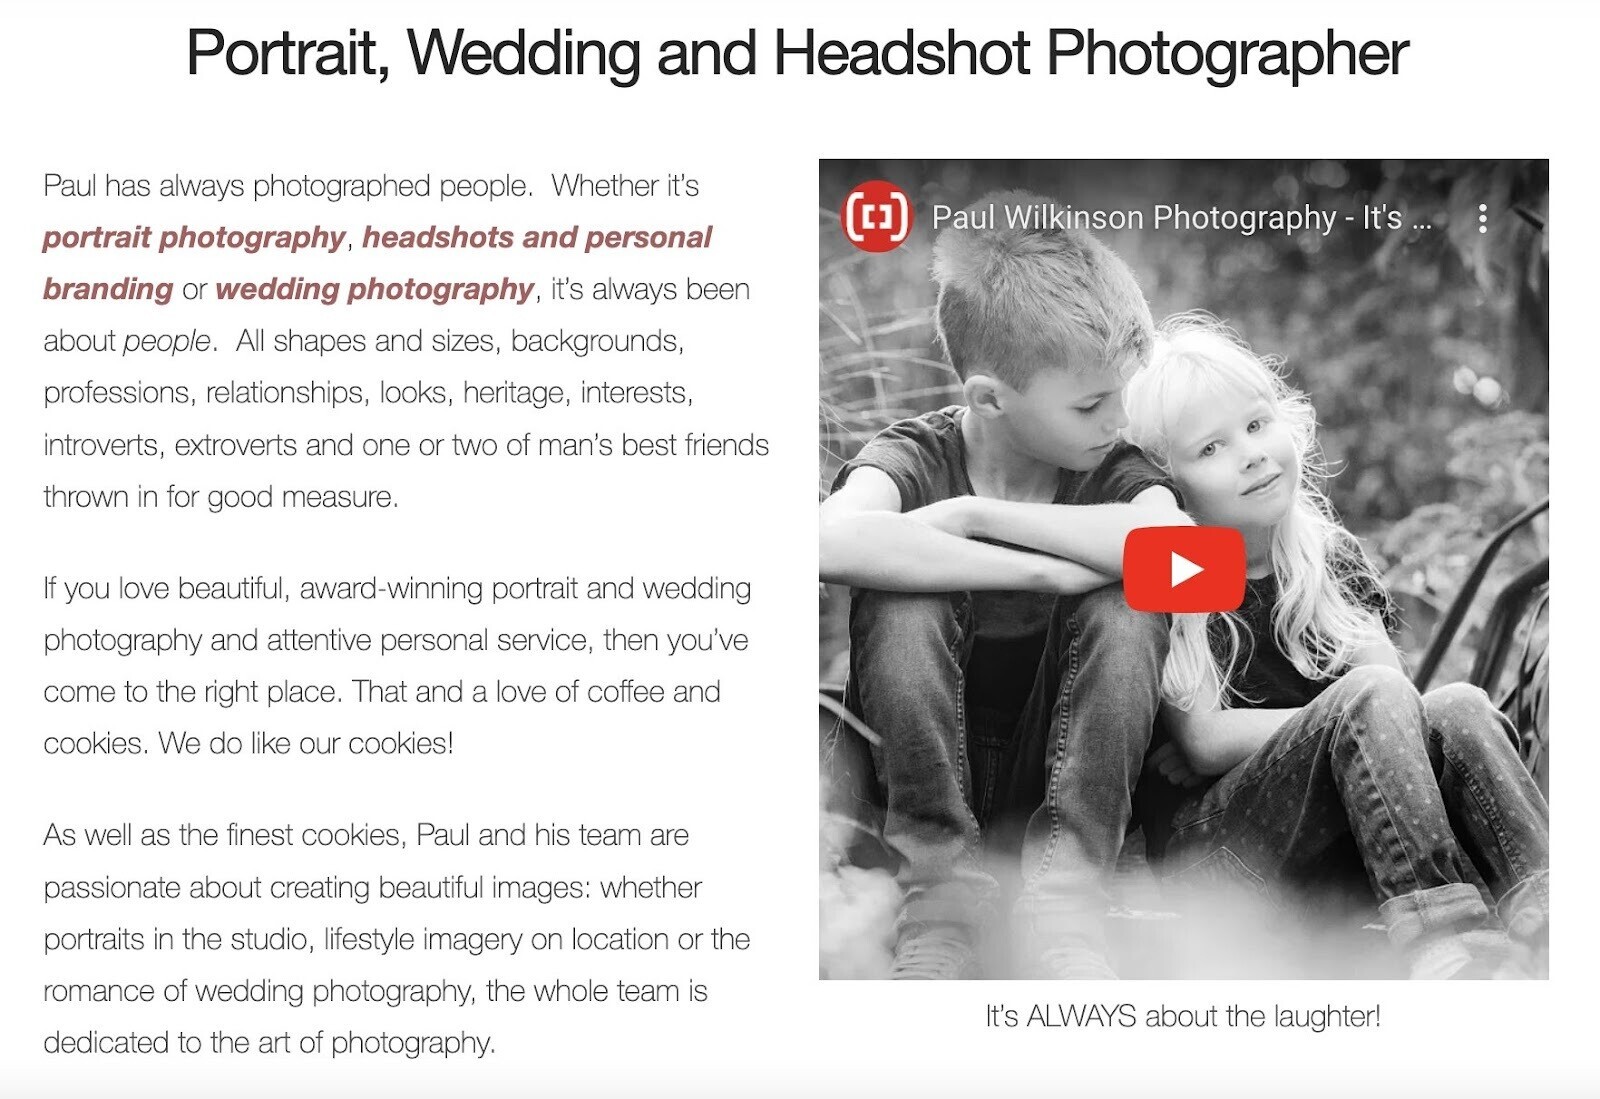 "Portrait, Wedding and Headshot Photographer" page by Paul Wilkinson